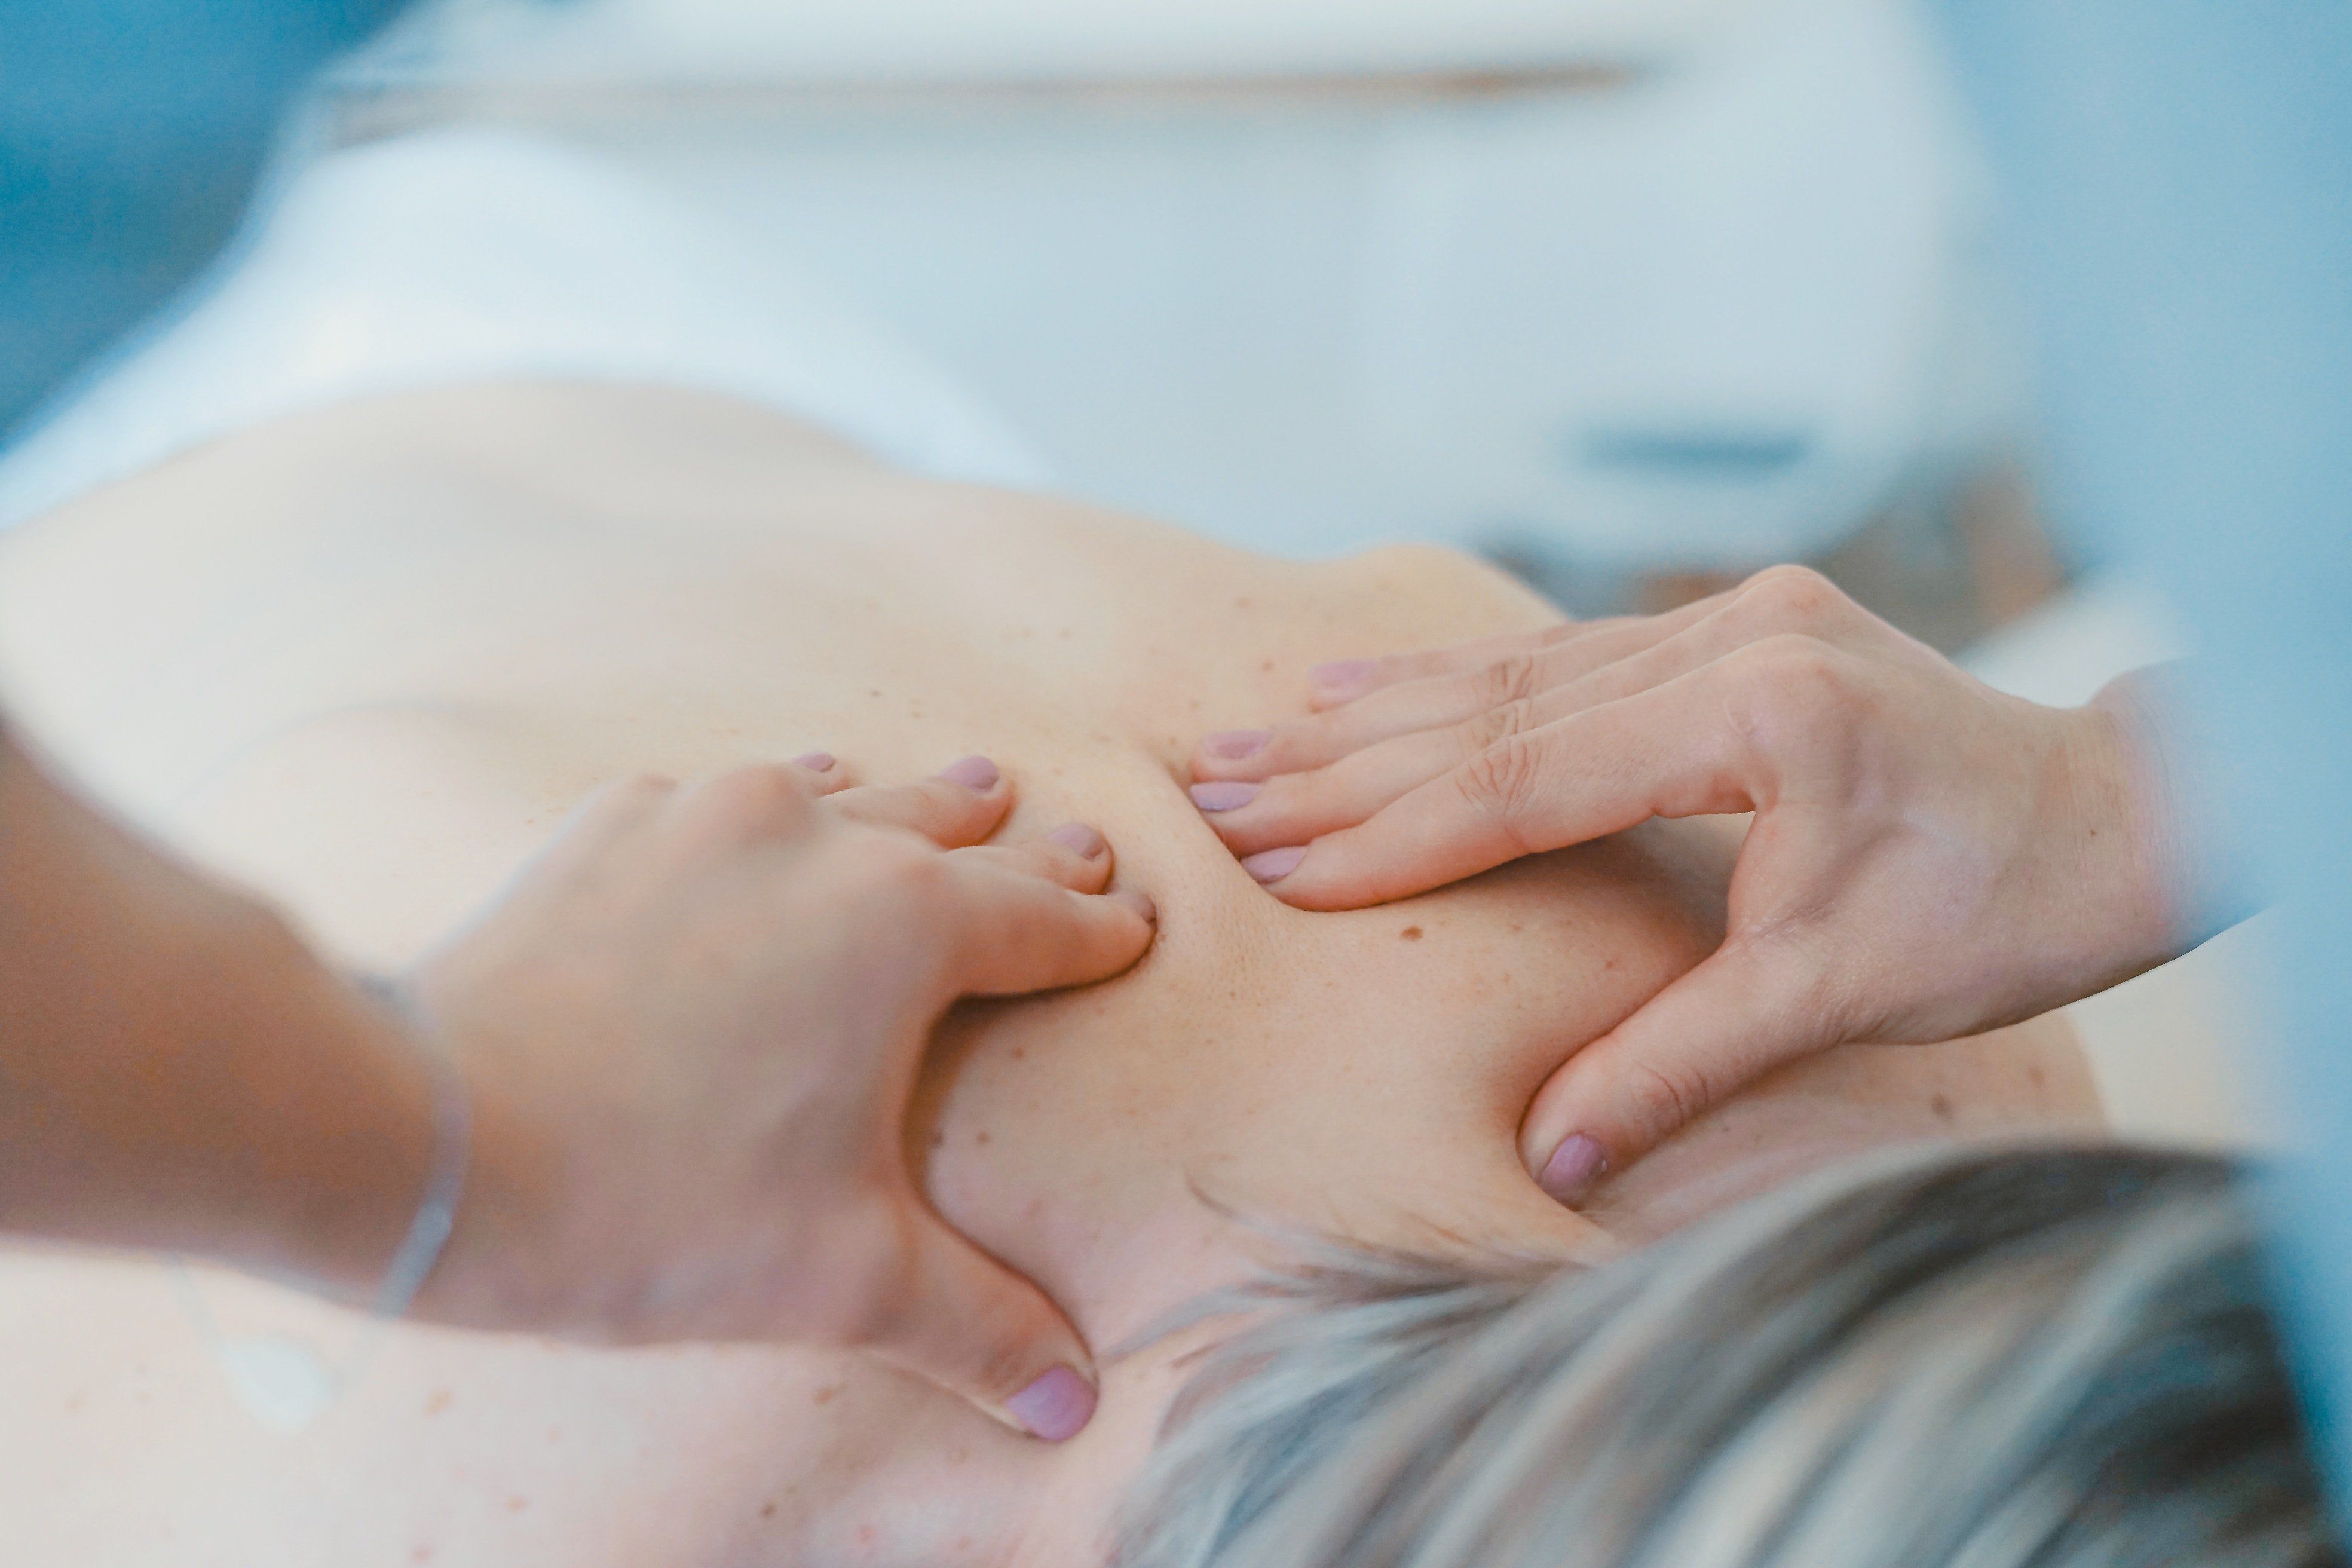 10 Massage Techniques For Sciatica Pain Relief - Harley Street Specialist  Hospital